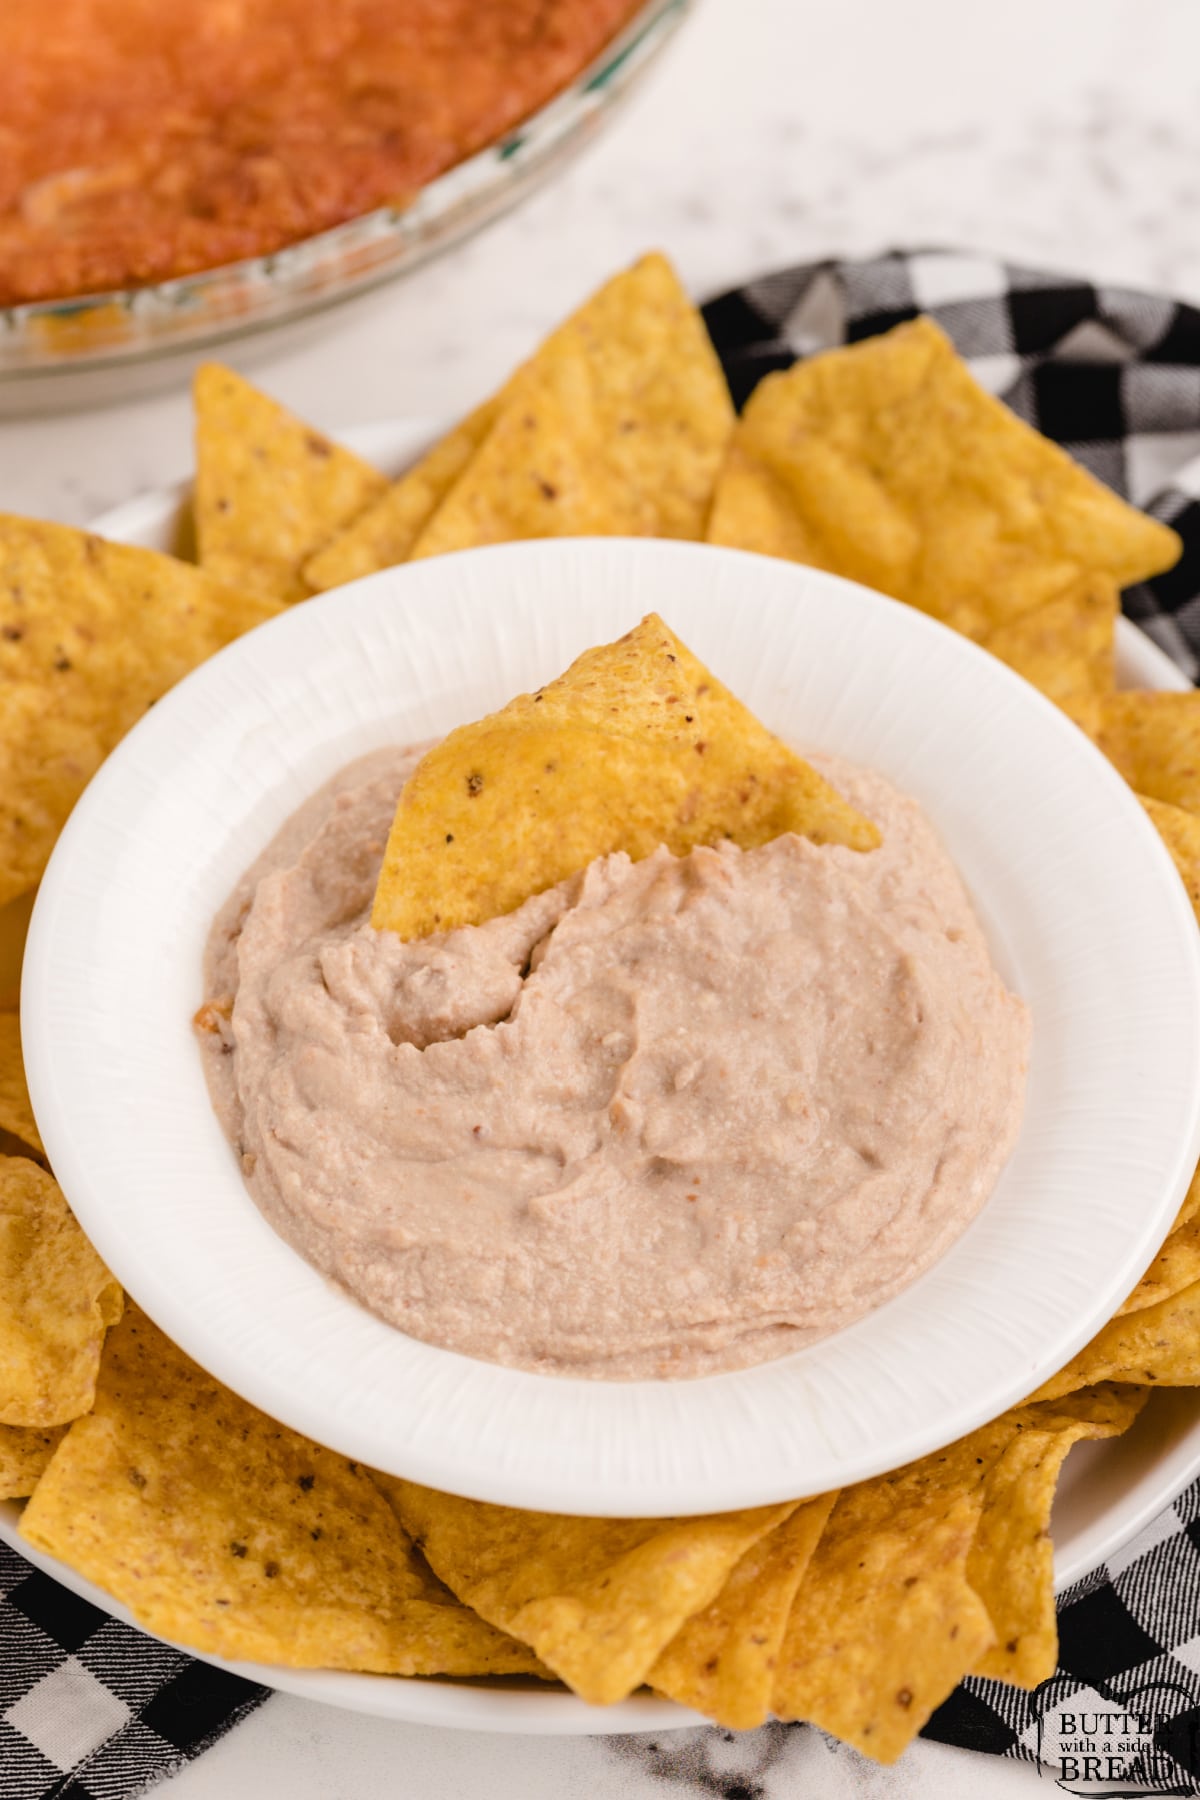 Chip dip made with refried beans, cream cheese, sour cream, green salsa and cheddar